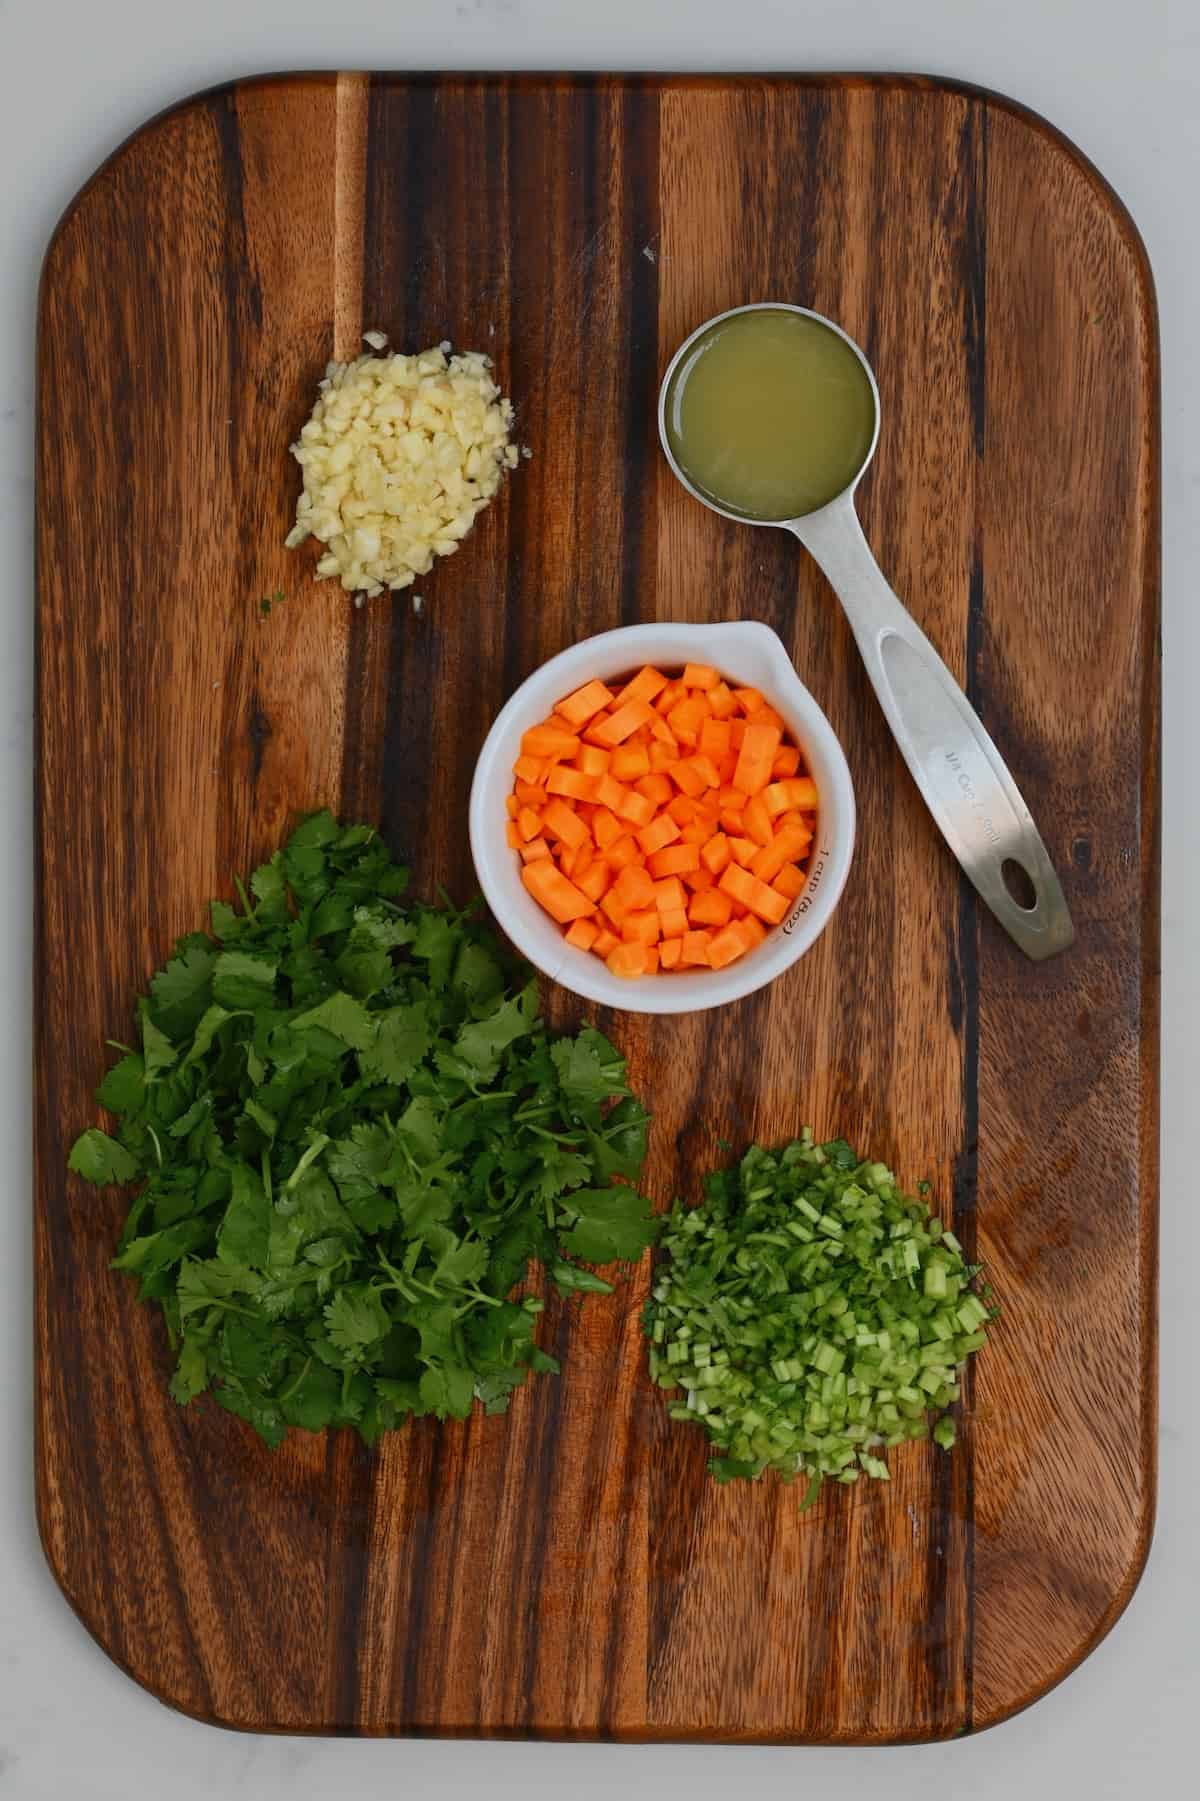 Chopped ingredients for stew